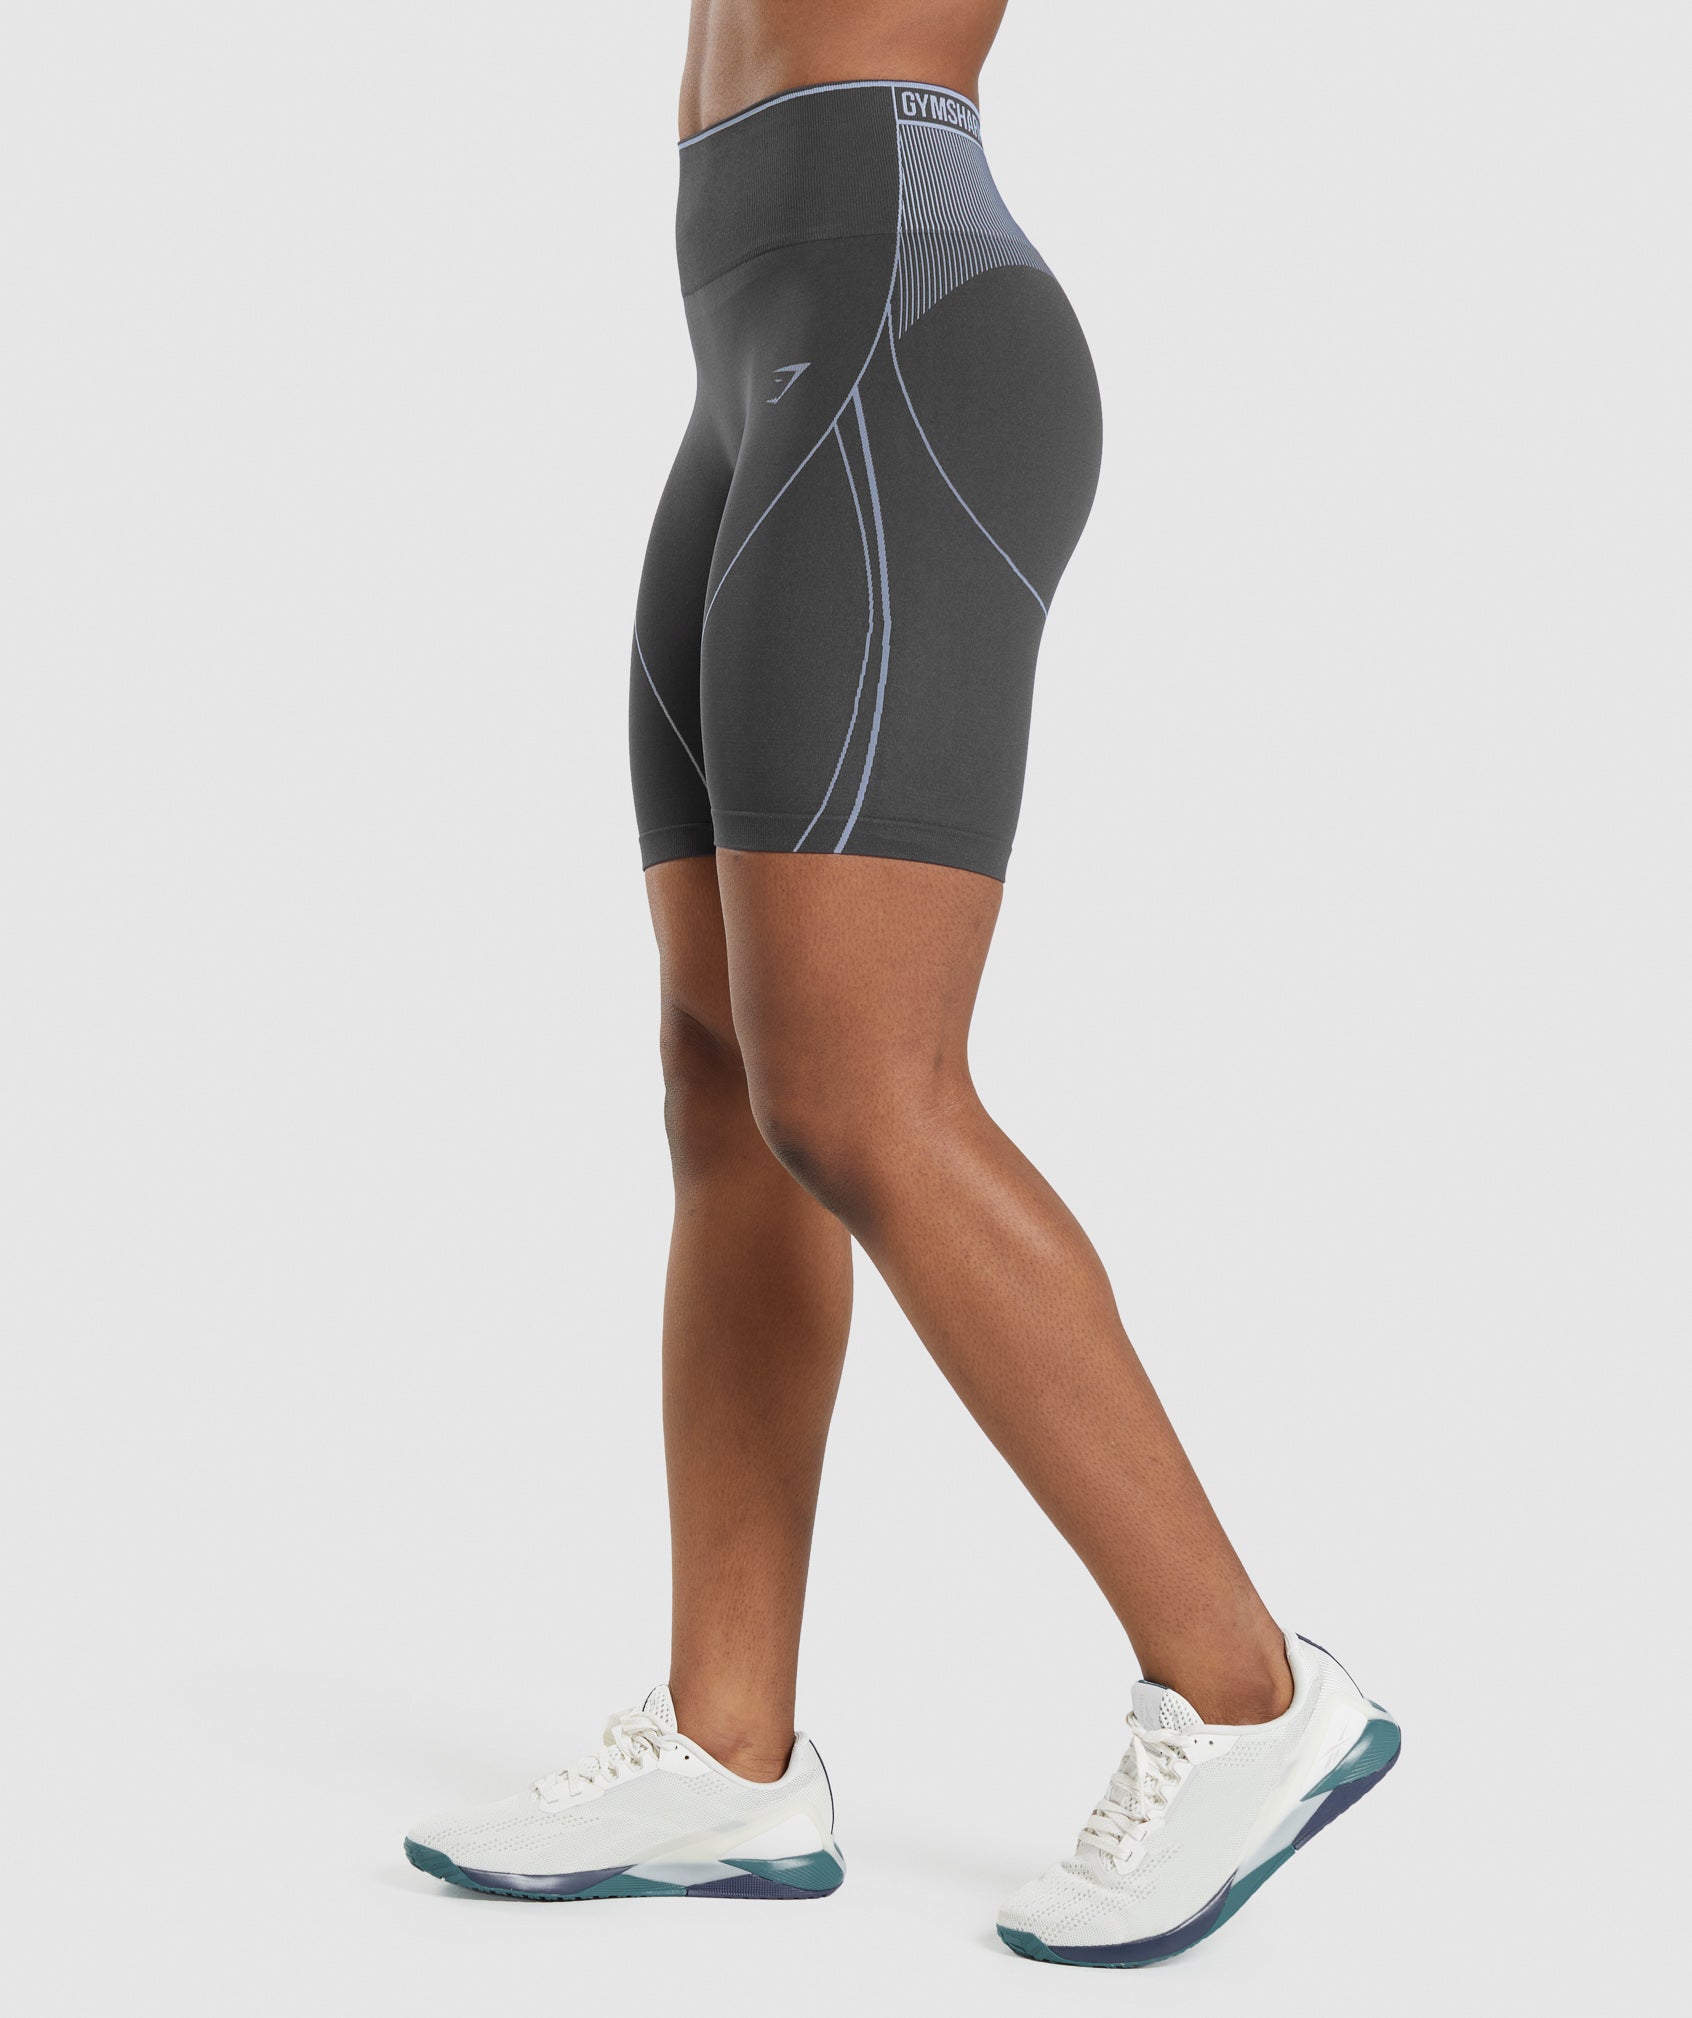 Apex Seamless High Rise Short in Onyx Grey/Lavender Blue - view 3